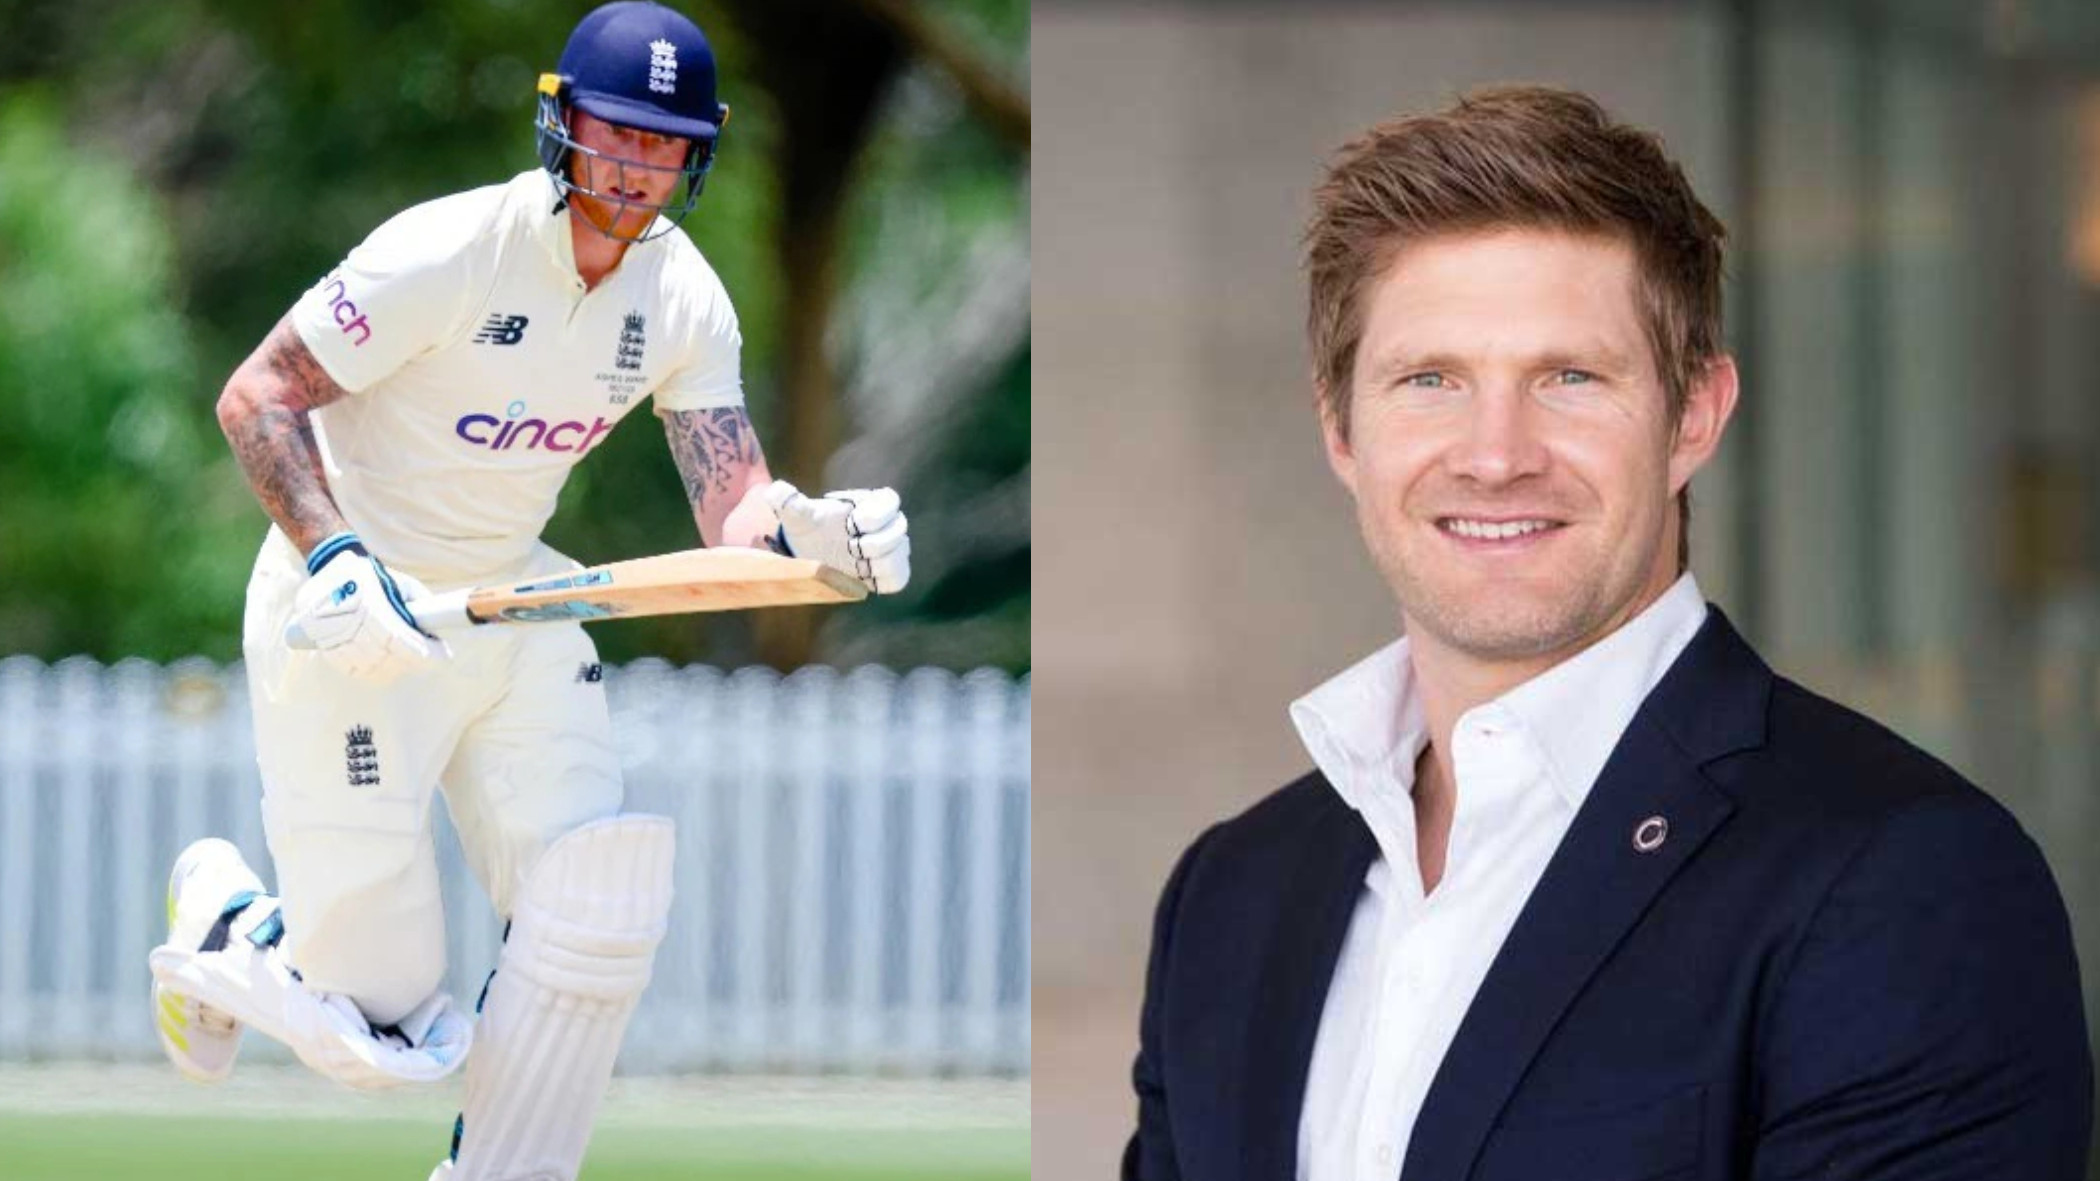 Ashes 2021-22: Shane Watson gobsmacked to see defensive batting from Ben Stokes in Ashes